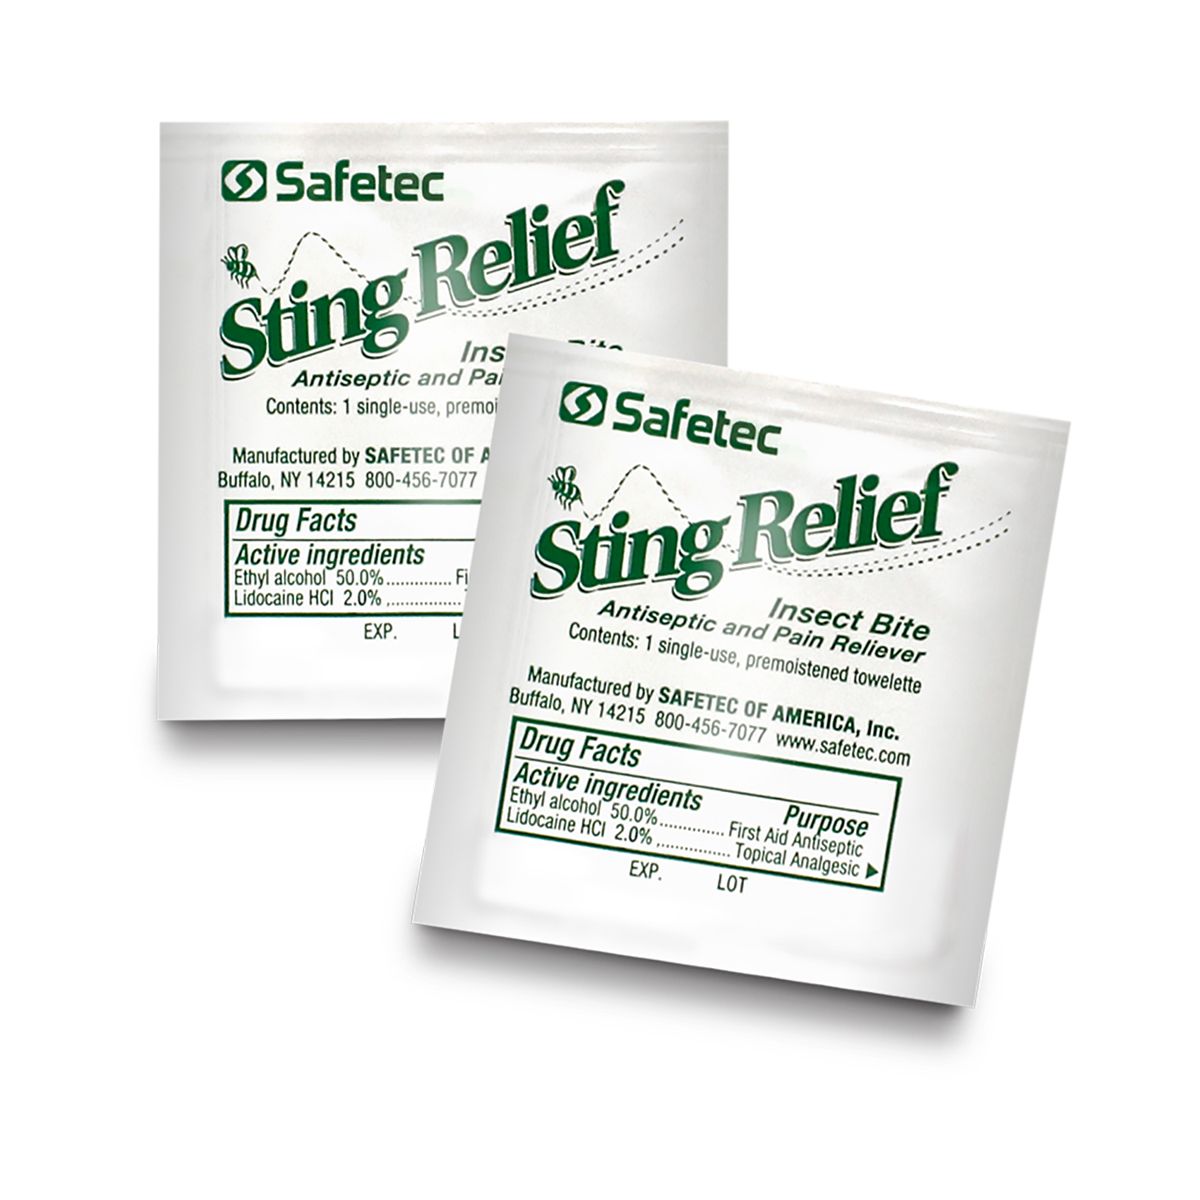 Safetec® Sting Relief Foil Wipe Packets 